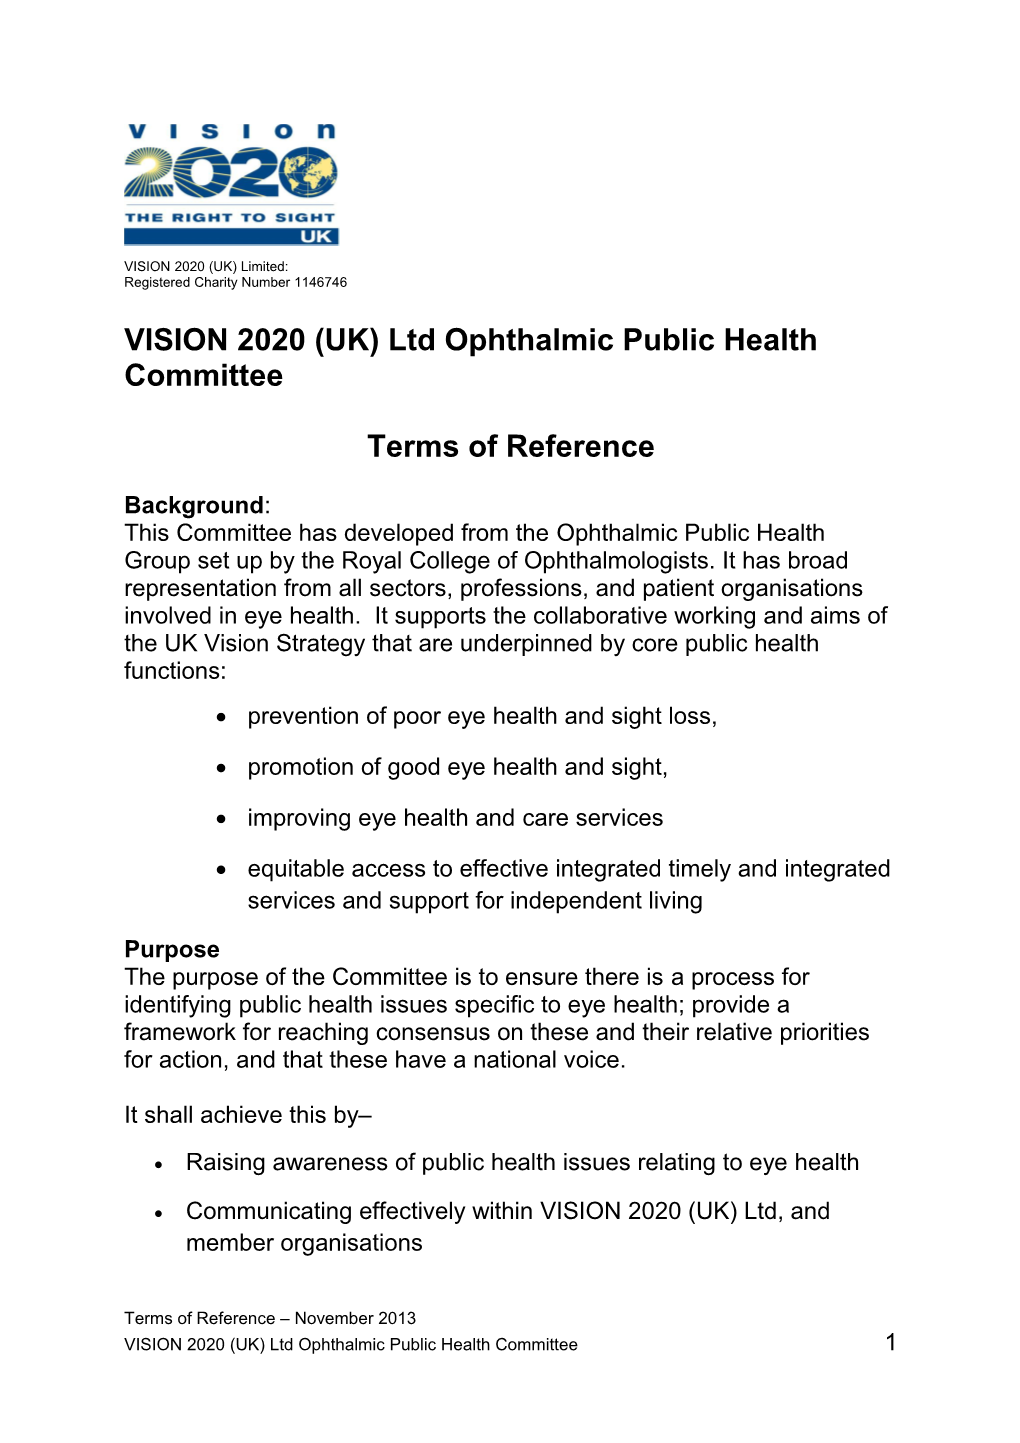 VISION 2020 (UK) Ltd Ophthalmic Public Health Committee